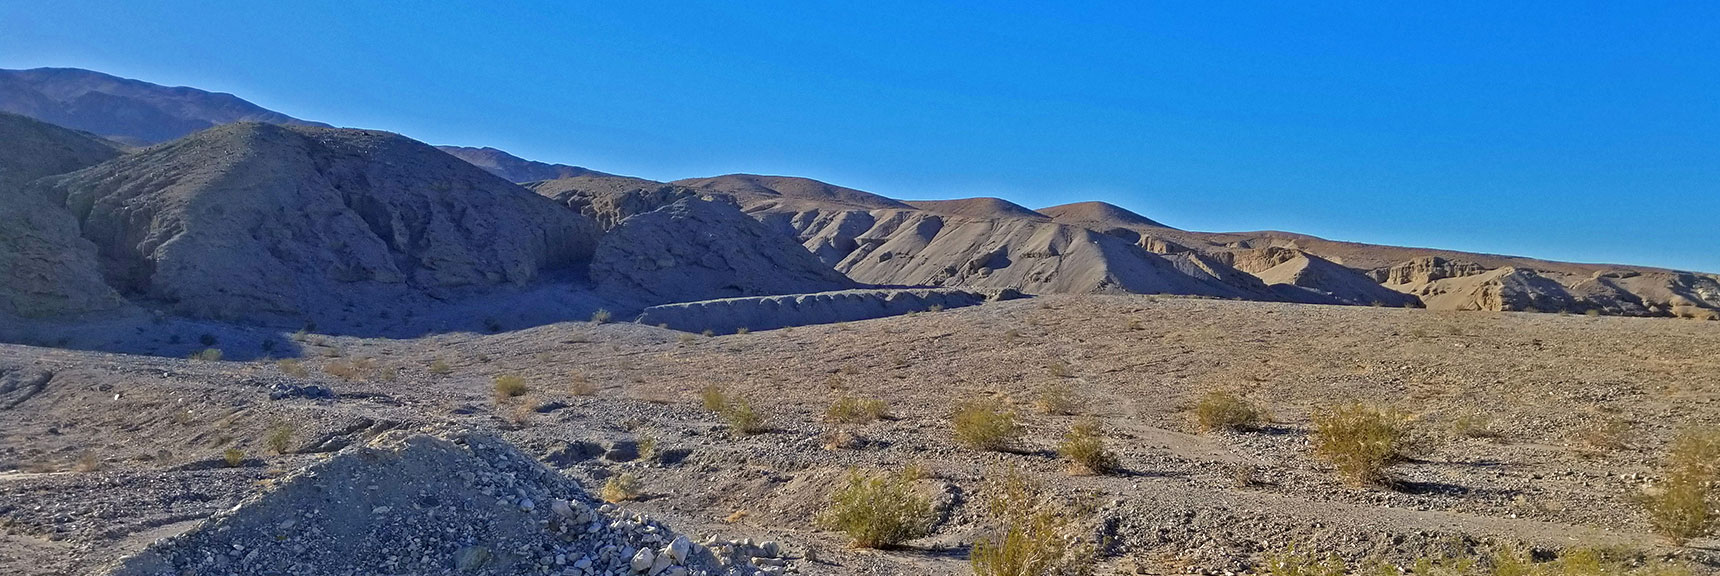 View Toward Canyon Opening from Trailhead Parking Area | Sidewinder Canyon | Death Valley National Park, California